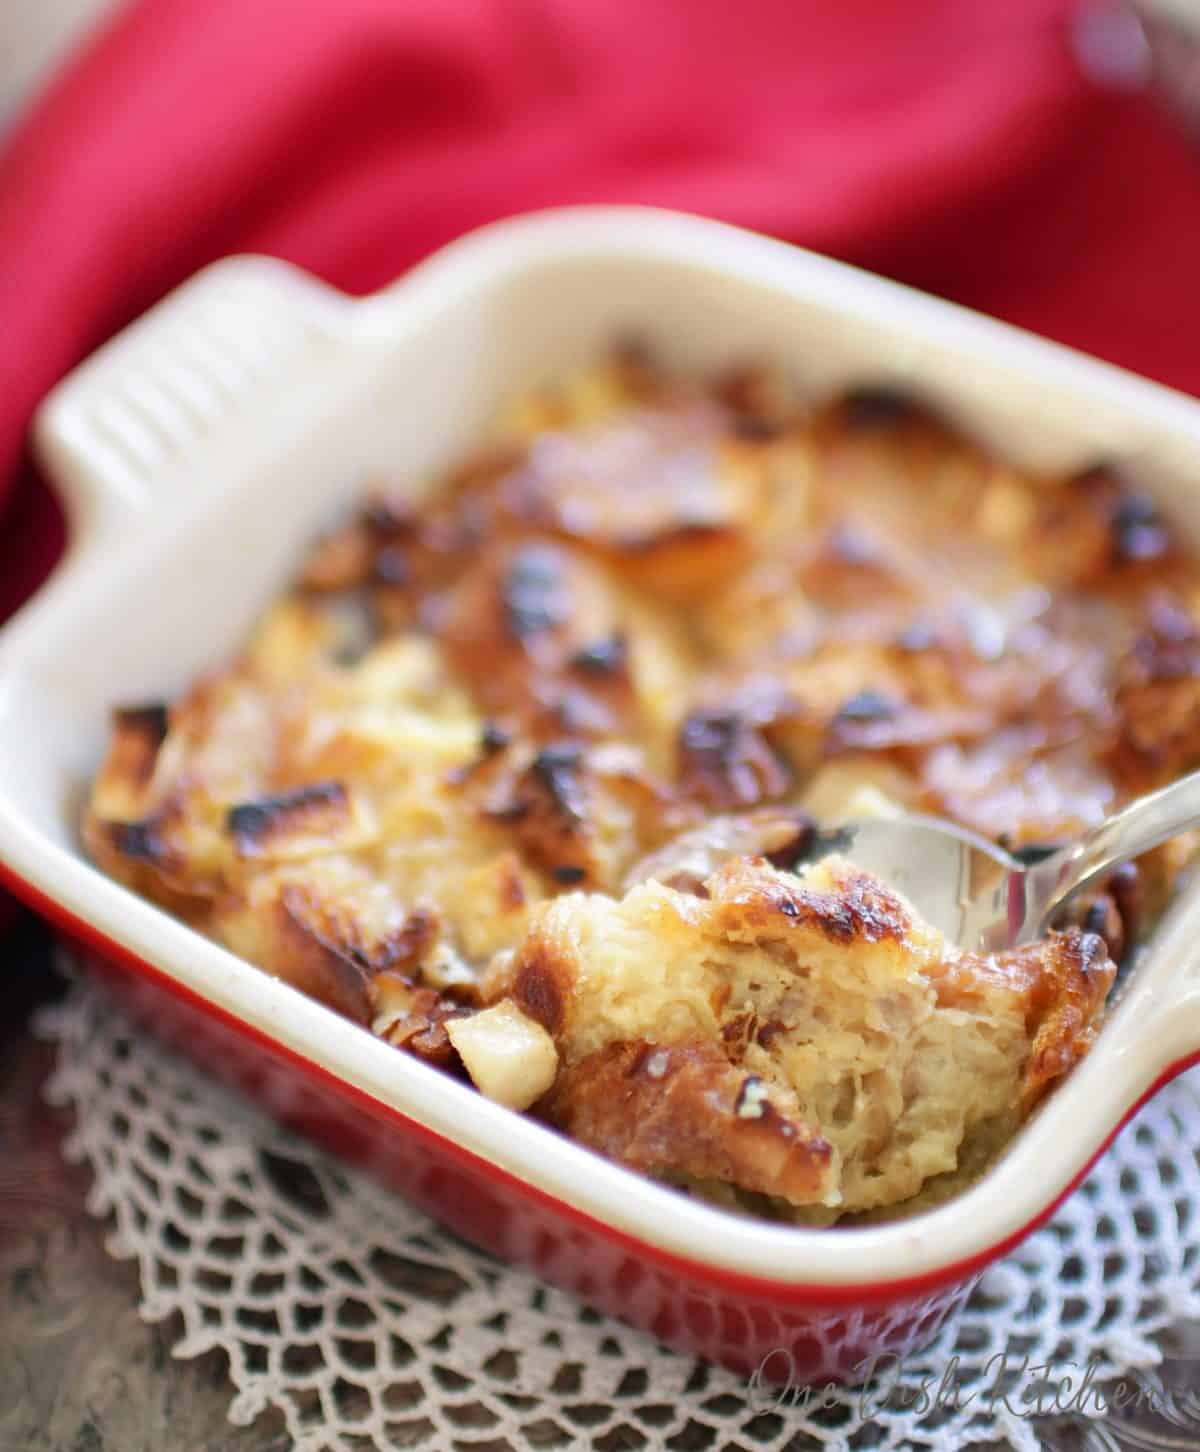 A spoonful of breakfast bread pudding from a small baking dish.